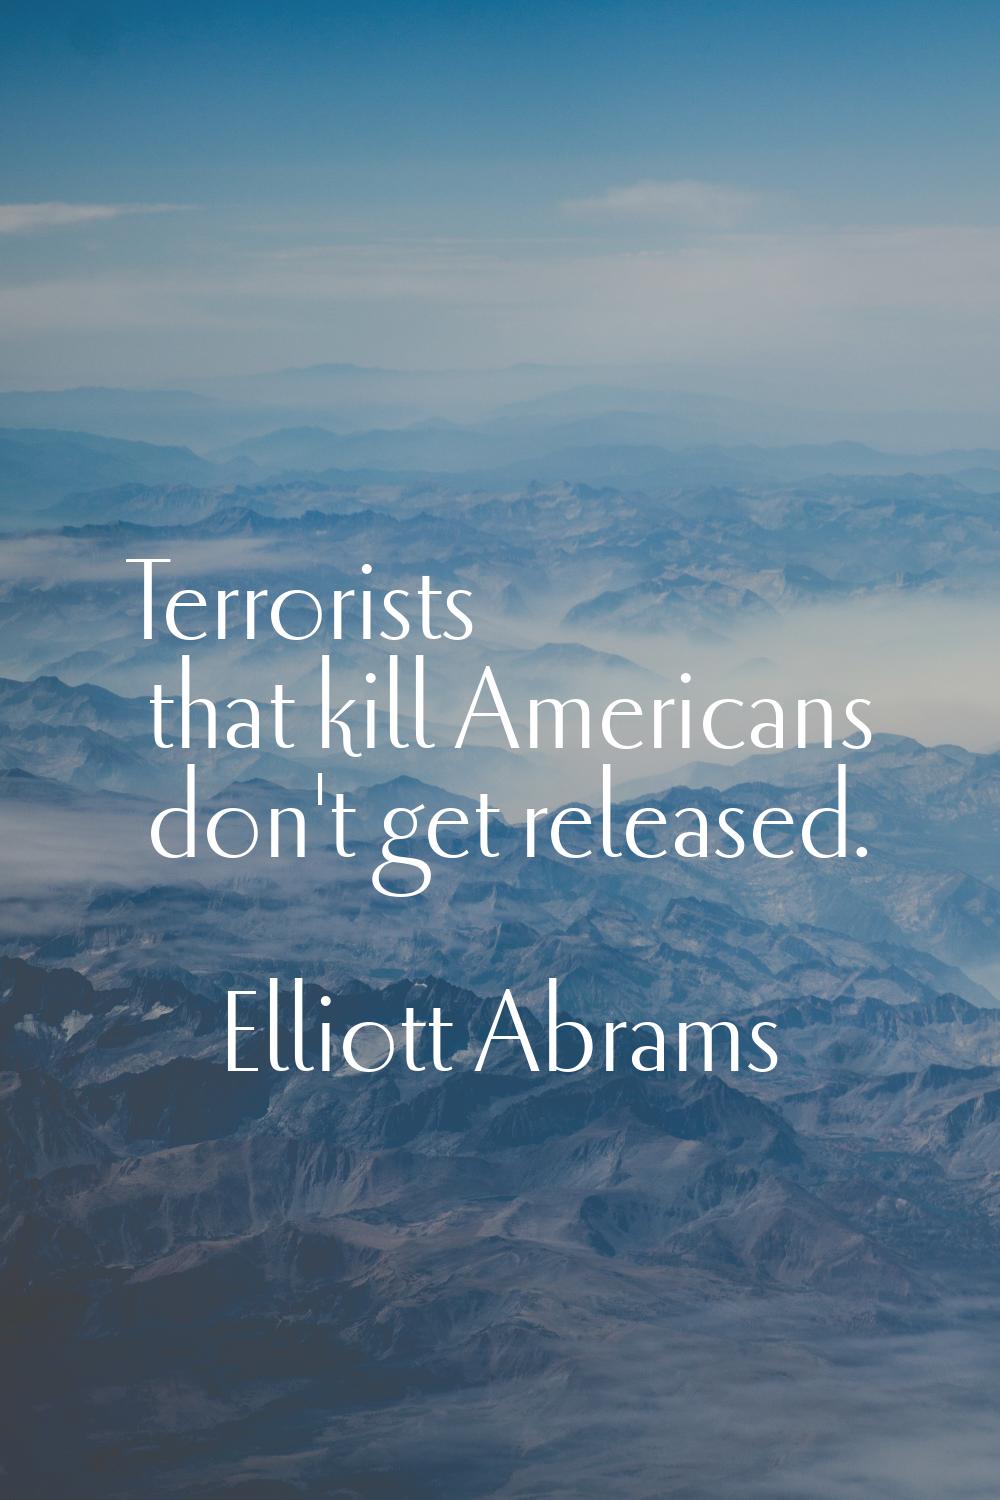 Terrorists that kill Americans don't get released.